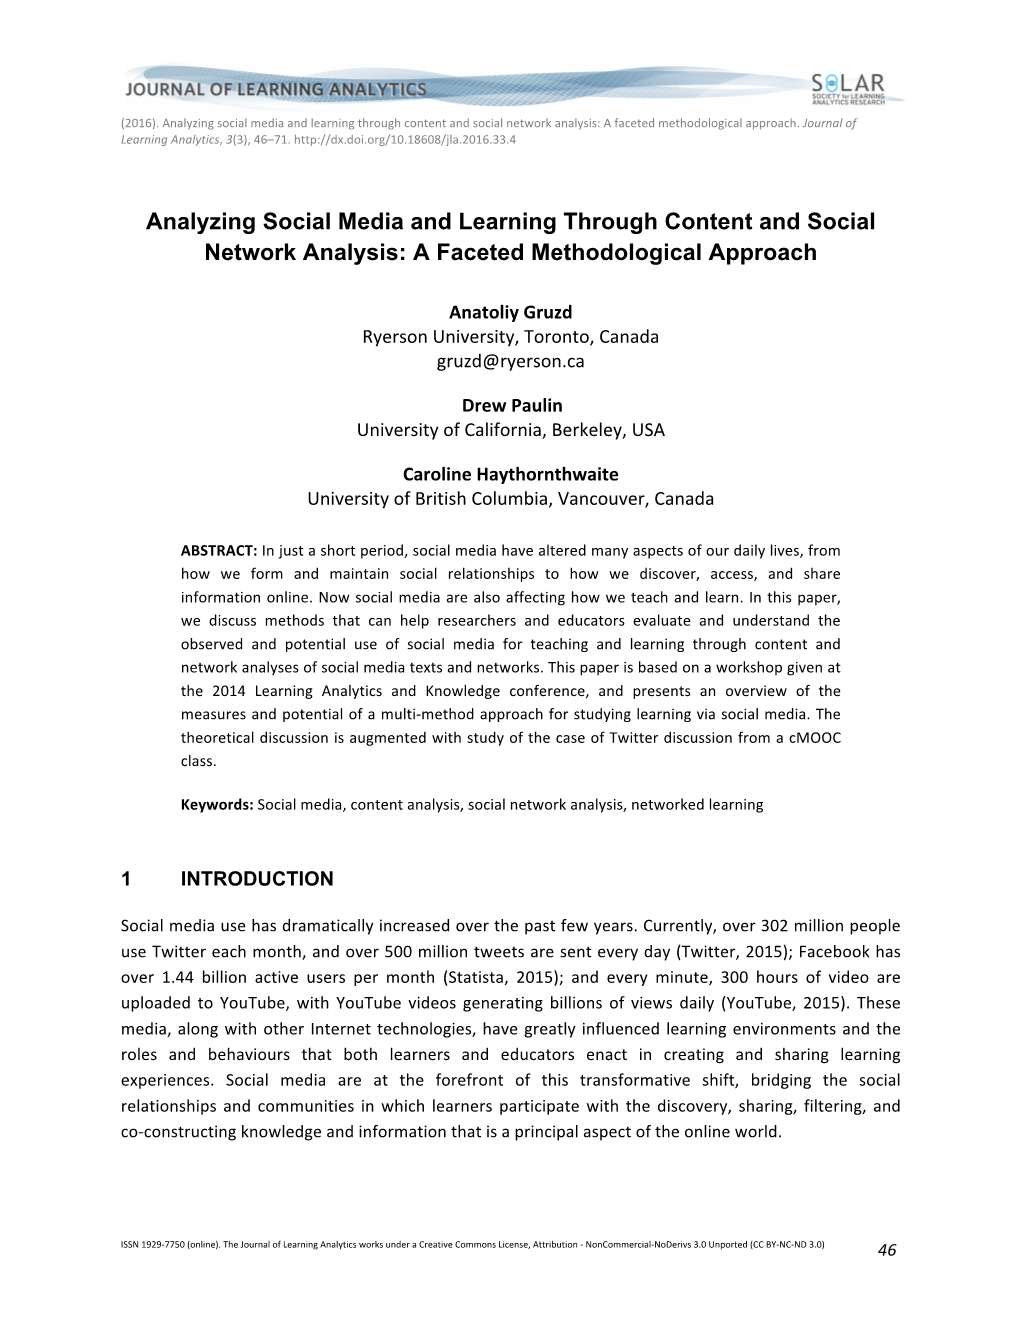 Analyzing Social Media and Learning Through Content and Social Network Analysis: a Faceted Methodological Approach